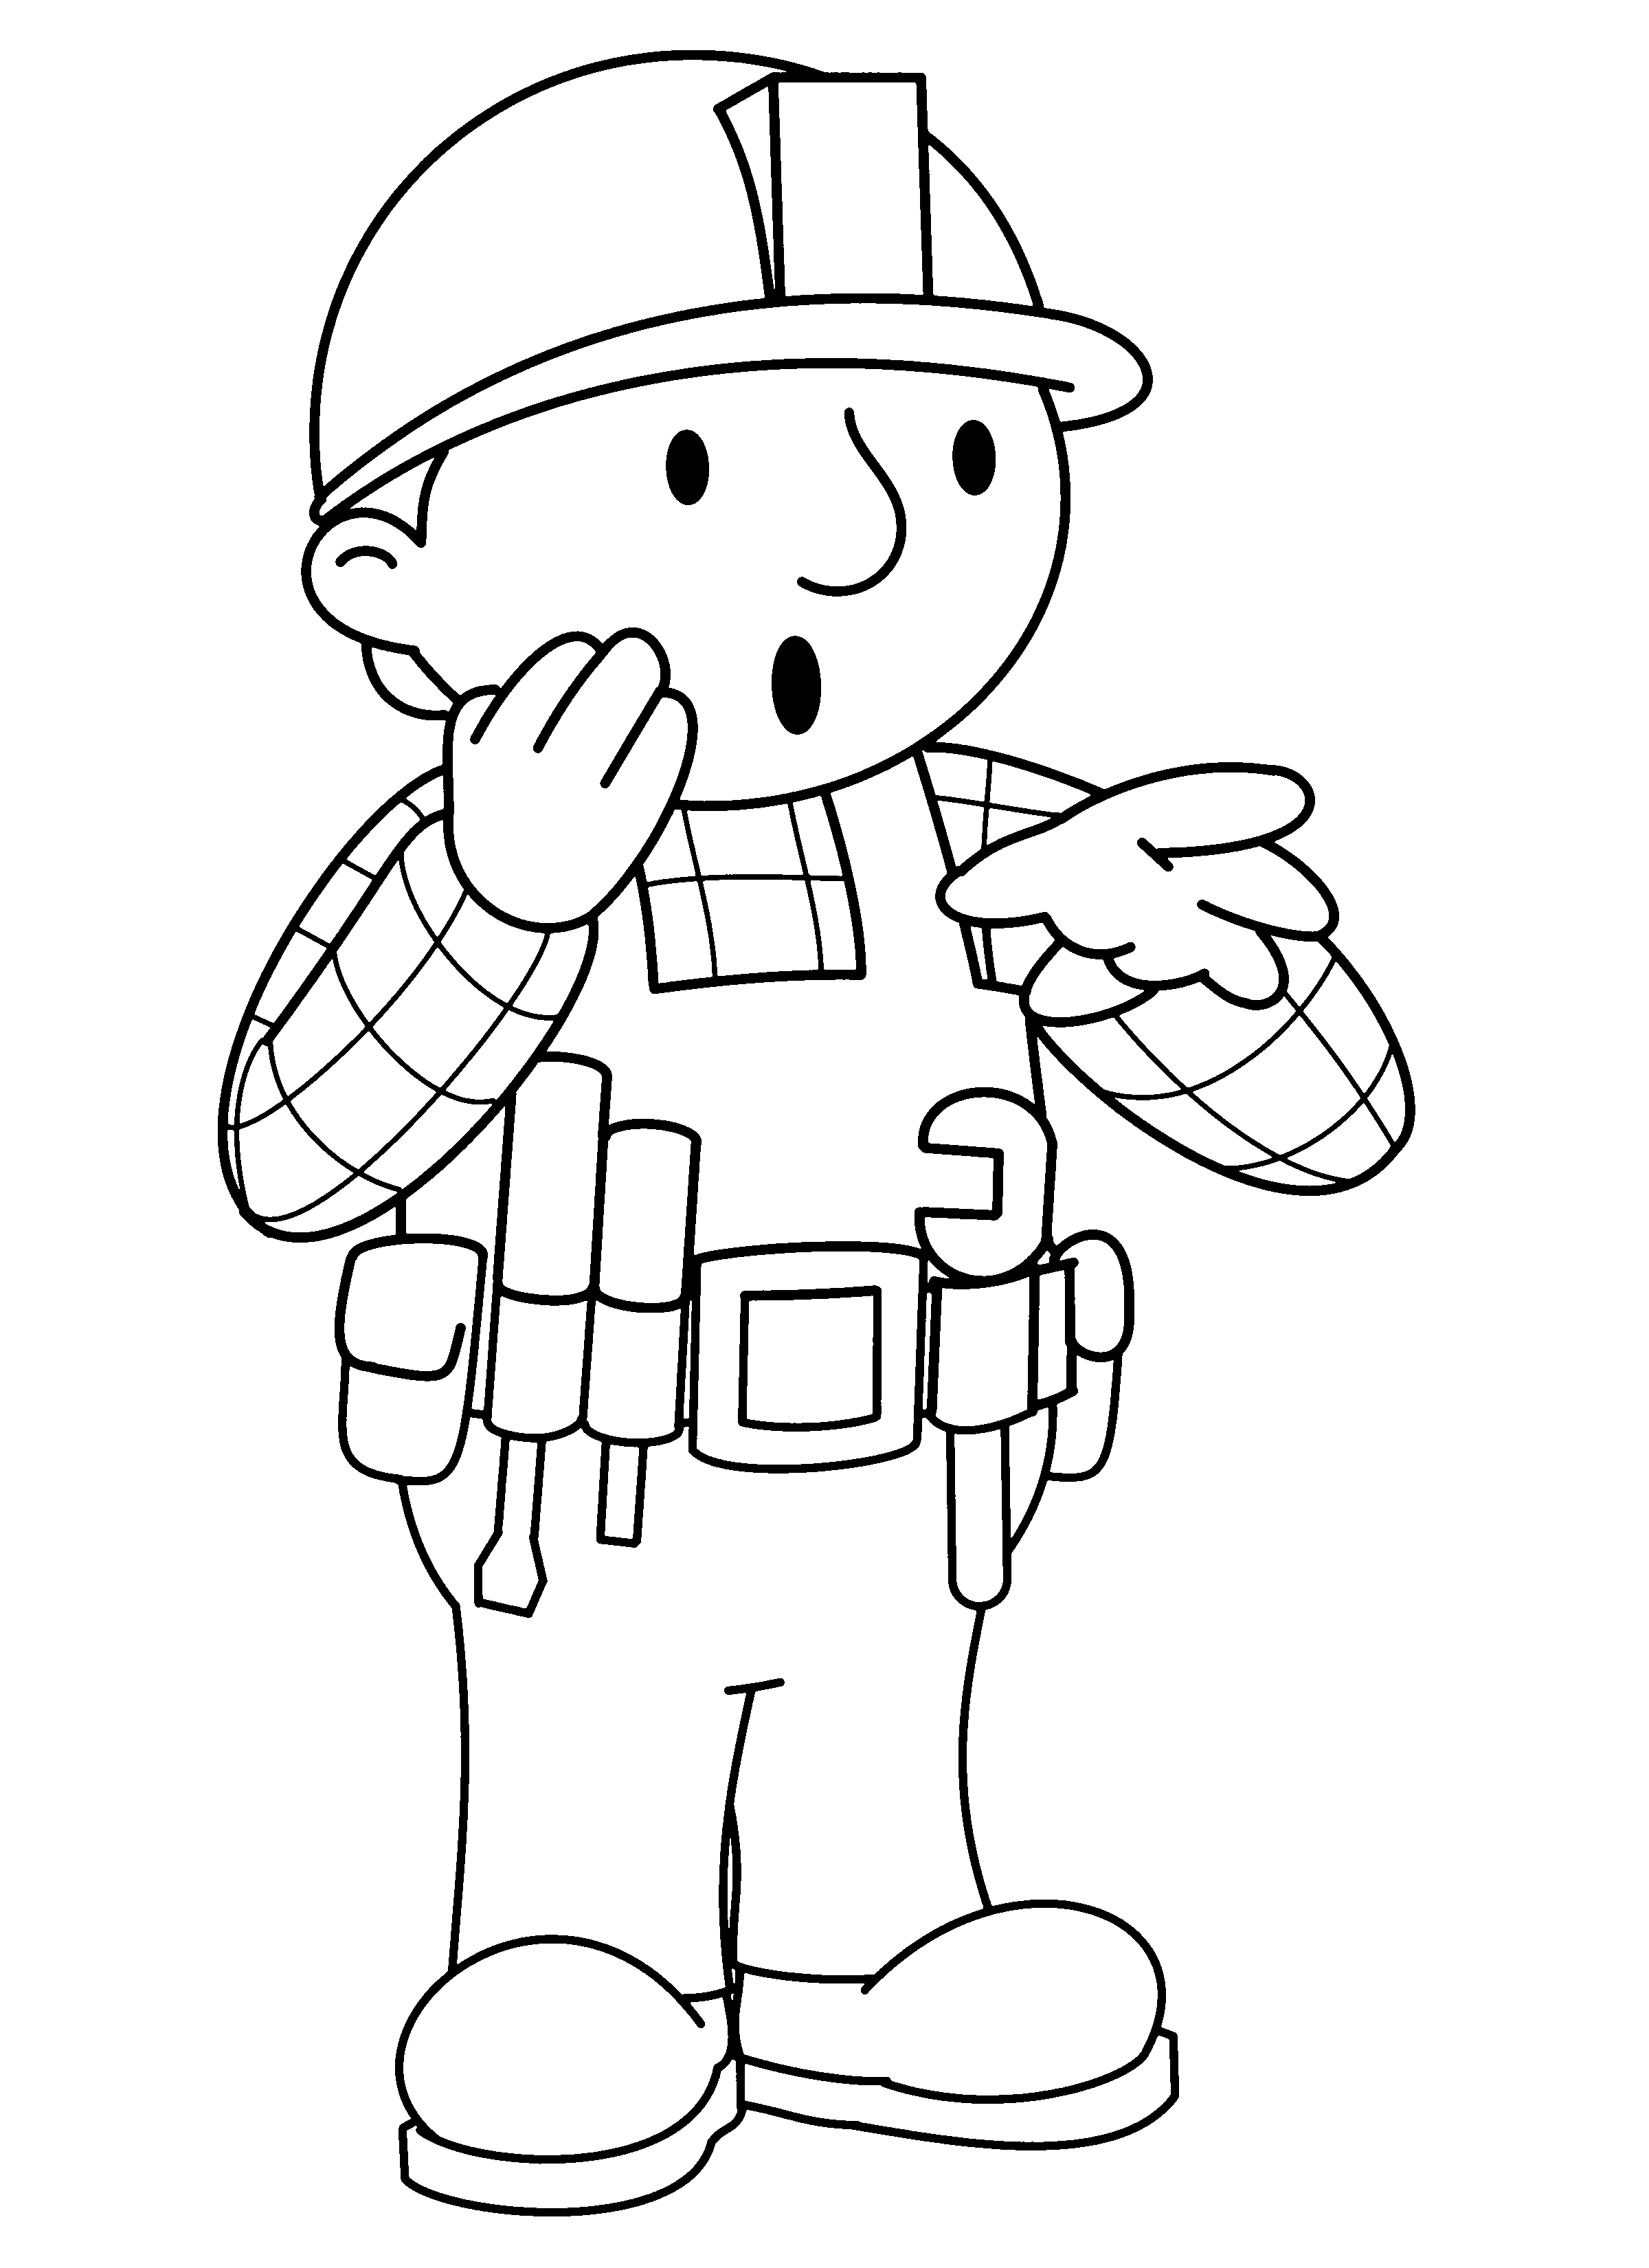 Bob The Builder Coloring Book Pages Coloring Pages